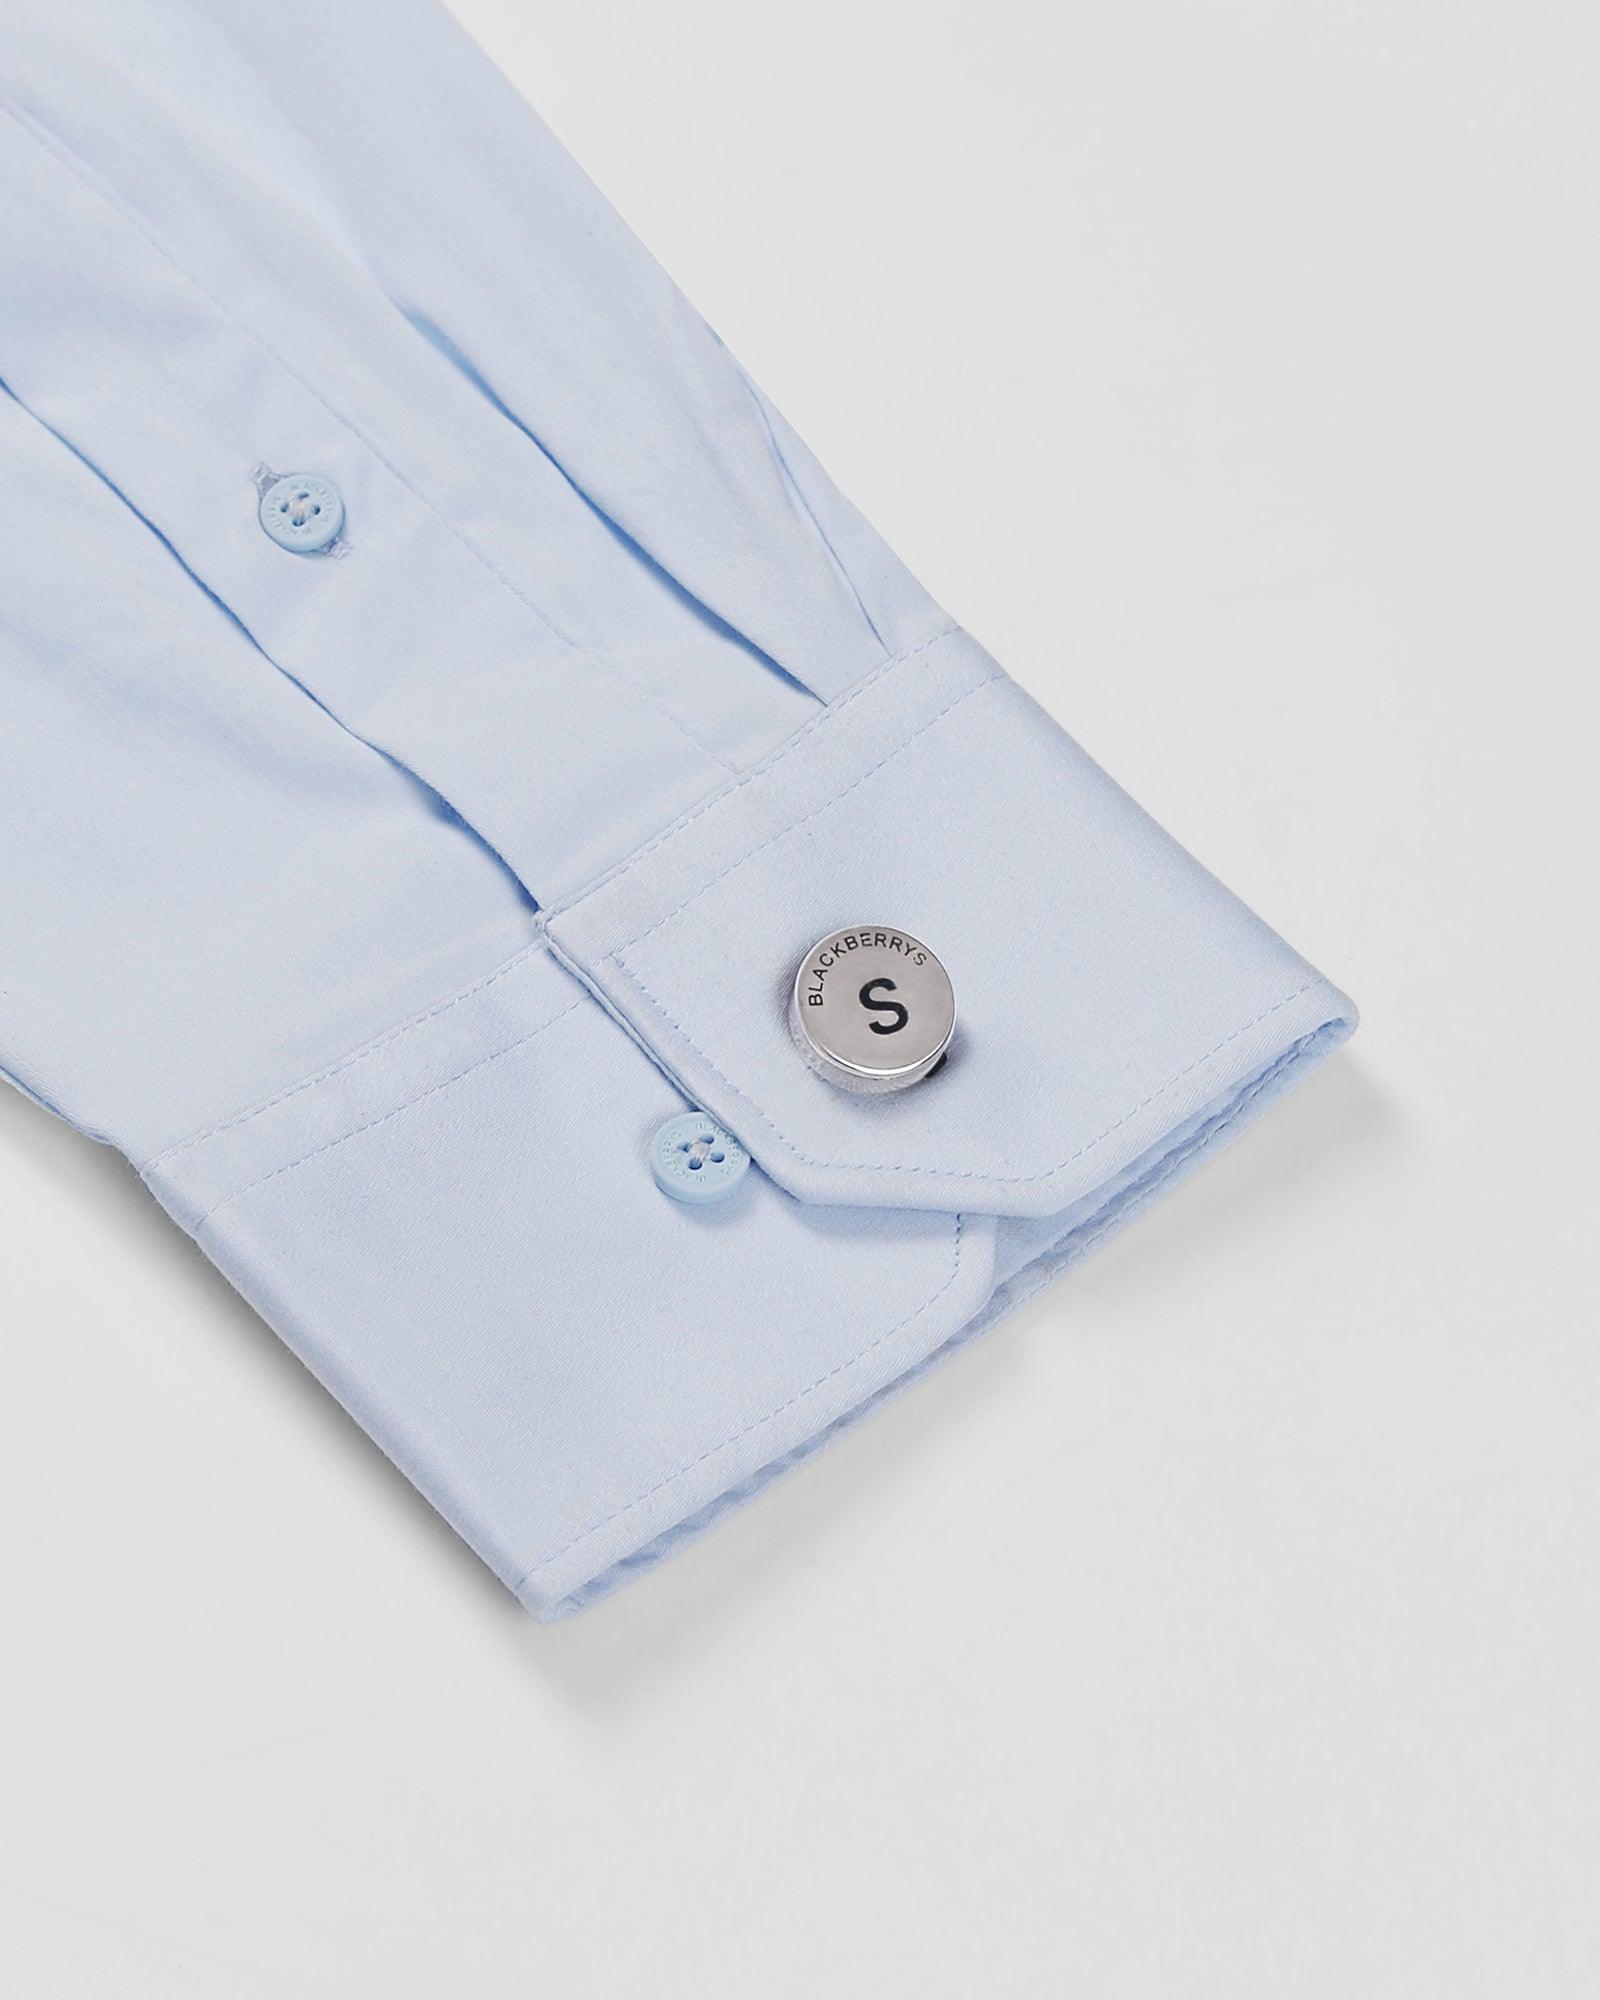 Personalised Shirt Button Cover With Alphabetic Initial-S